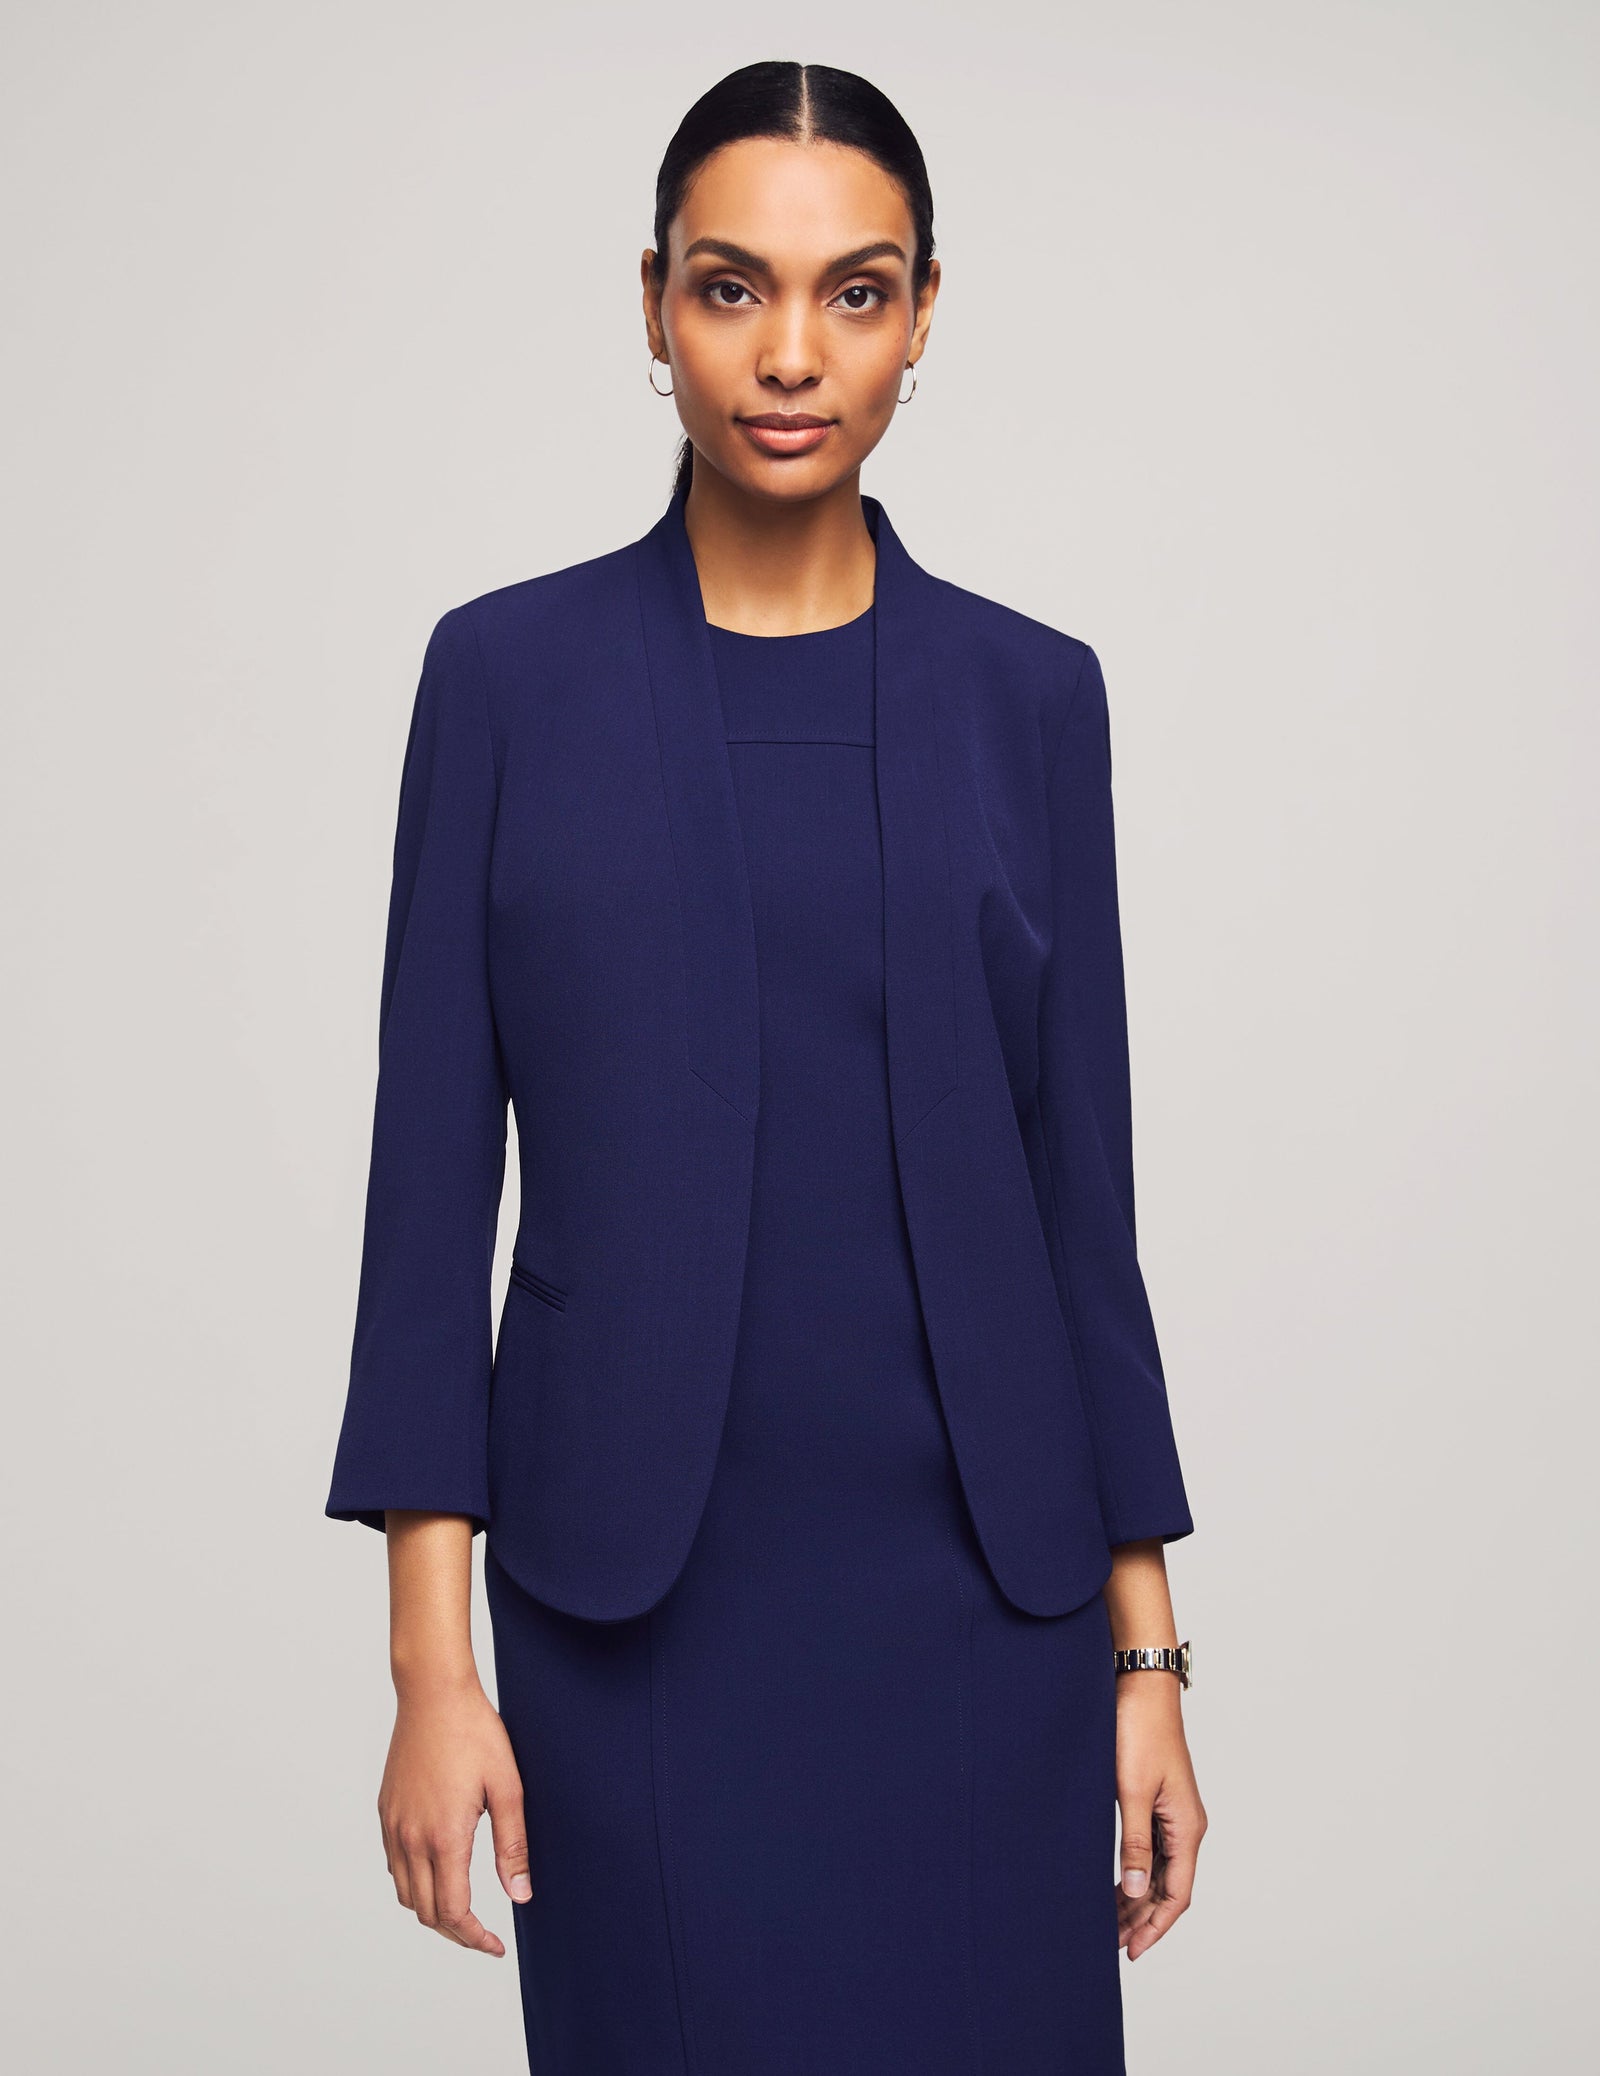 Formal Female Skirt Suits For Women Business Suits With Skirt And Jacket  Sets Ladies Navy Blue Blazer Work Wear Clothes - Skirt Suits - AliExpress